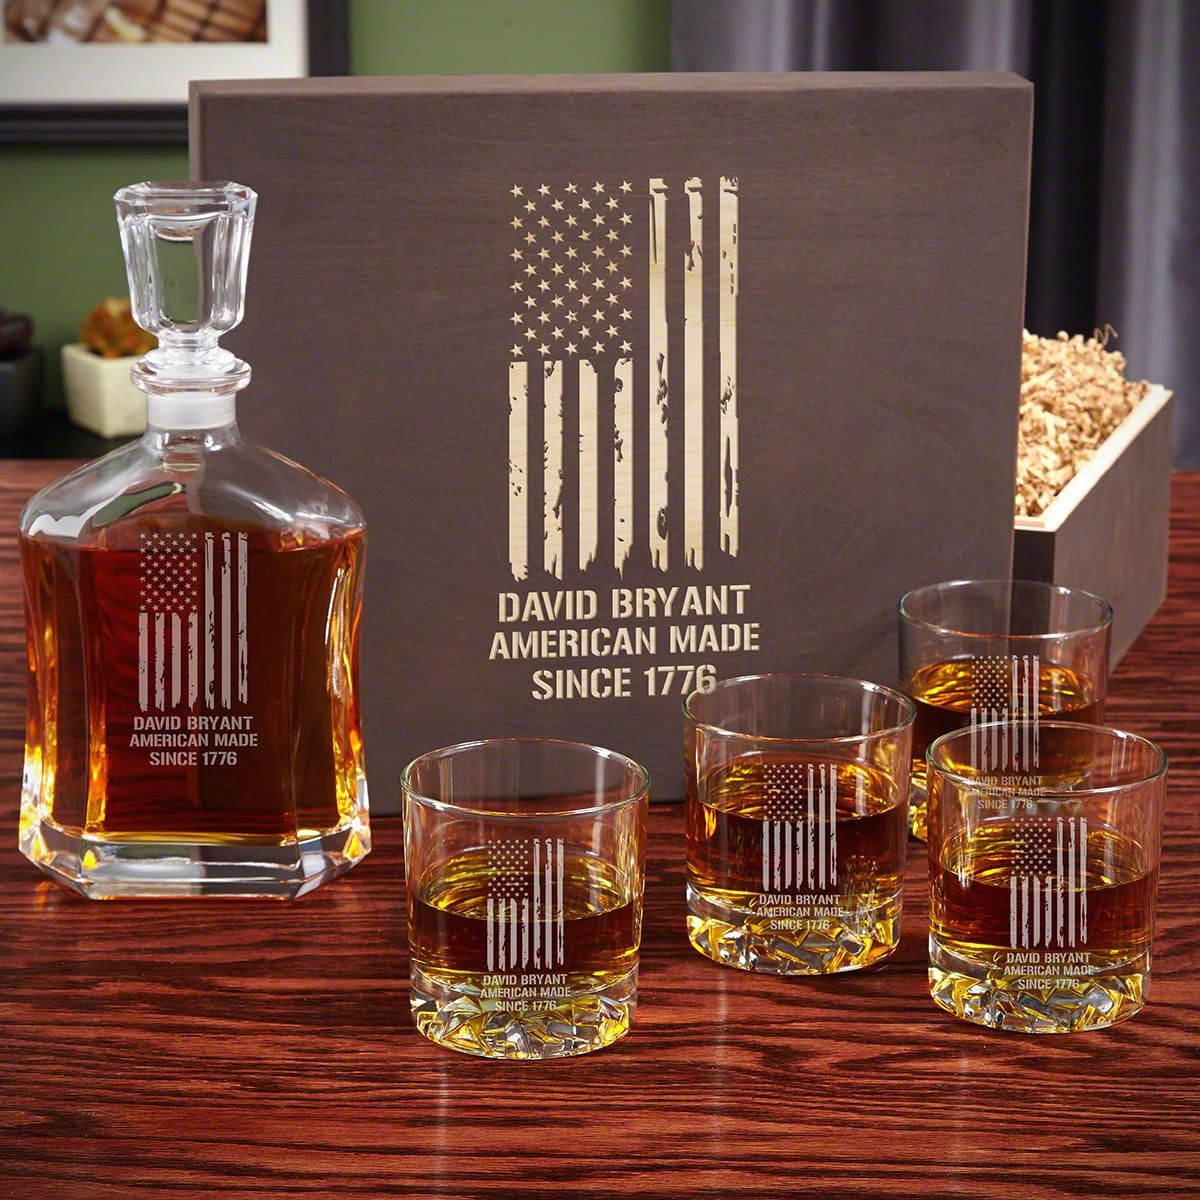 Custom Whiskey Decanter Box Set of Patriotic Gifts with Rocks Glasses - Old Glory Flag Design